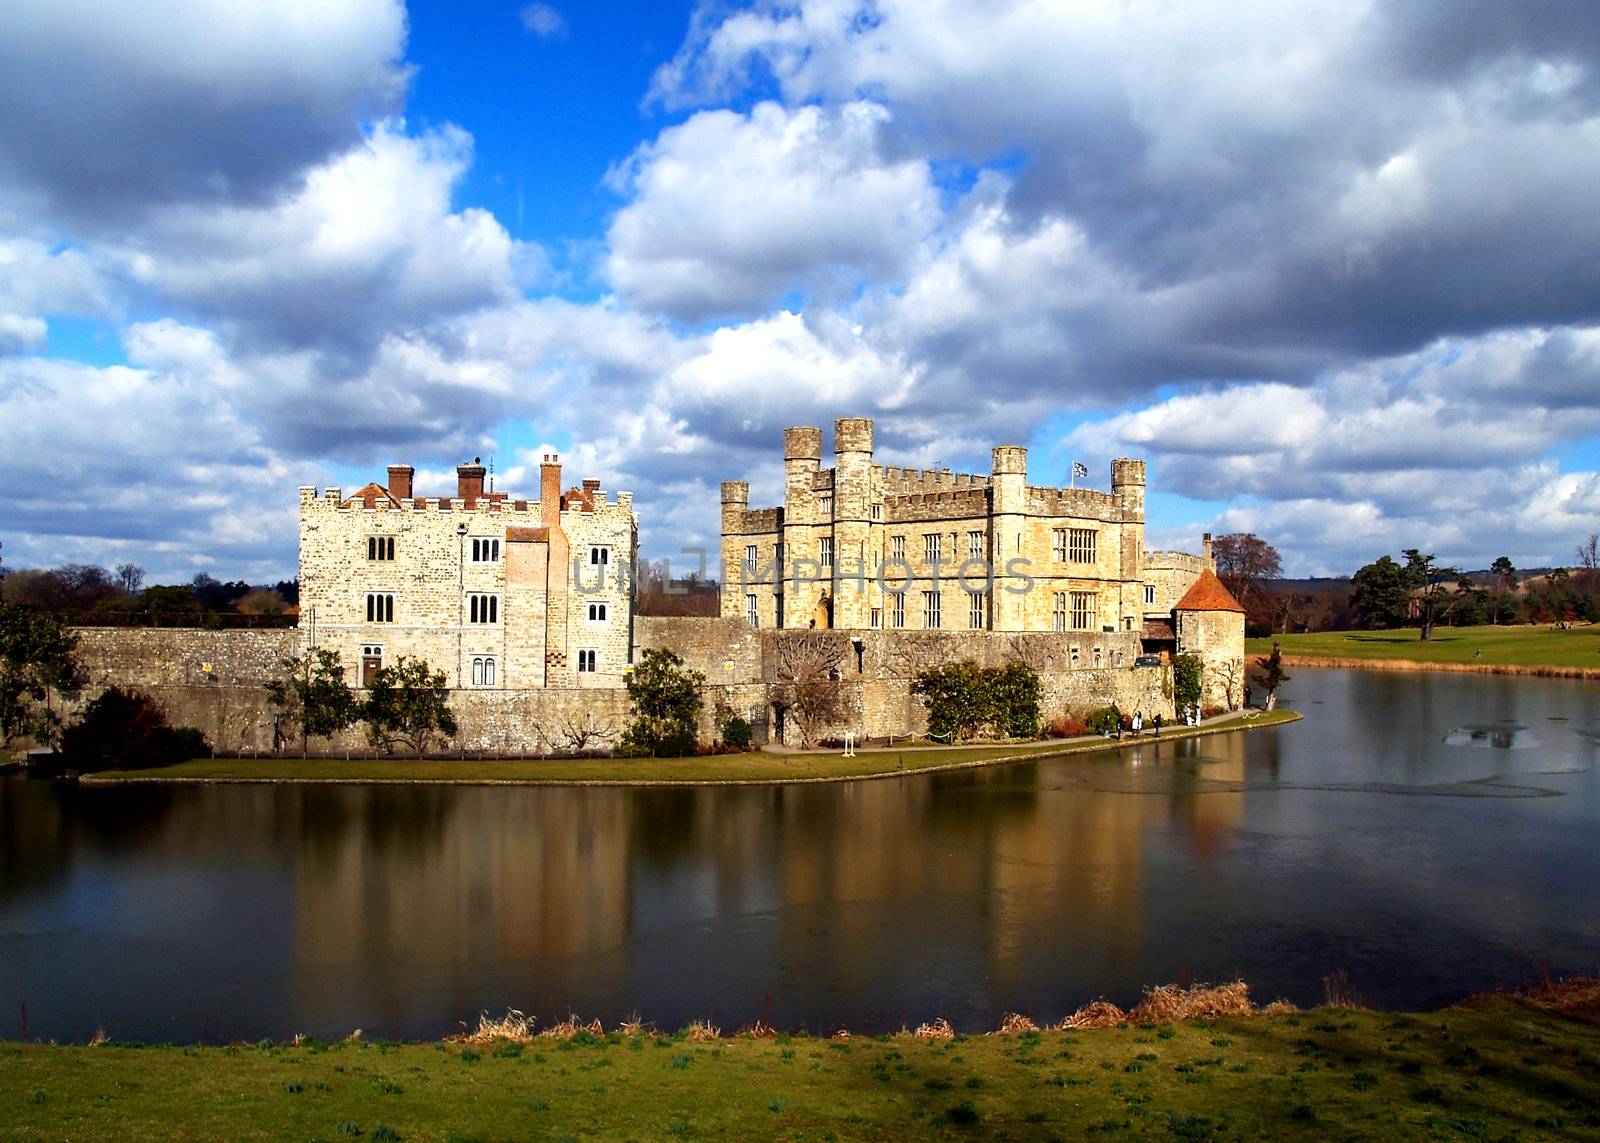 The leeds castle by gary718